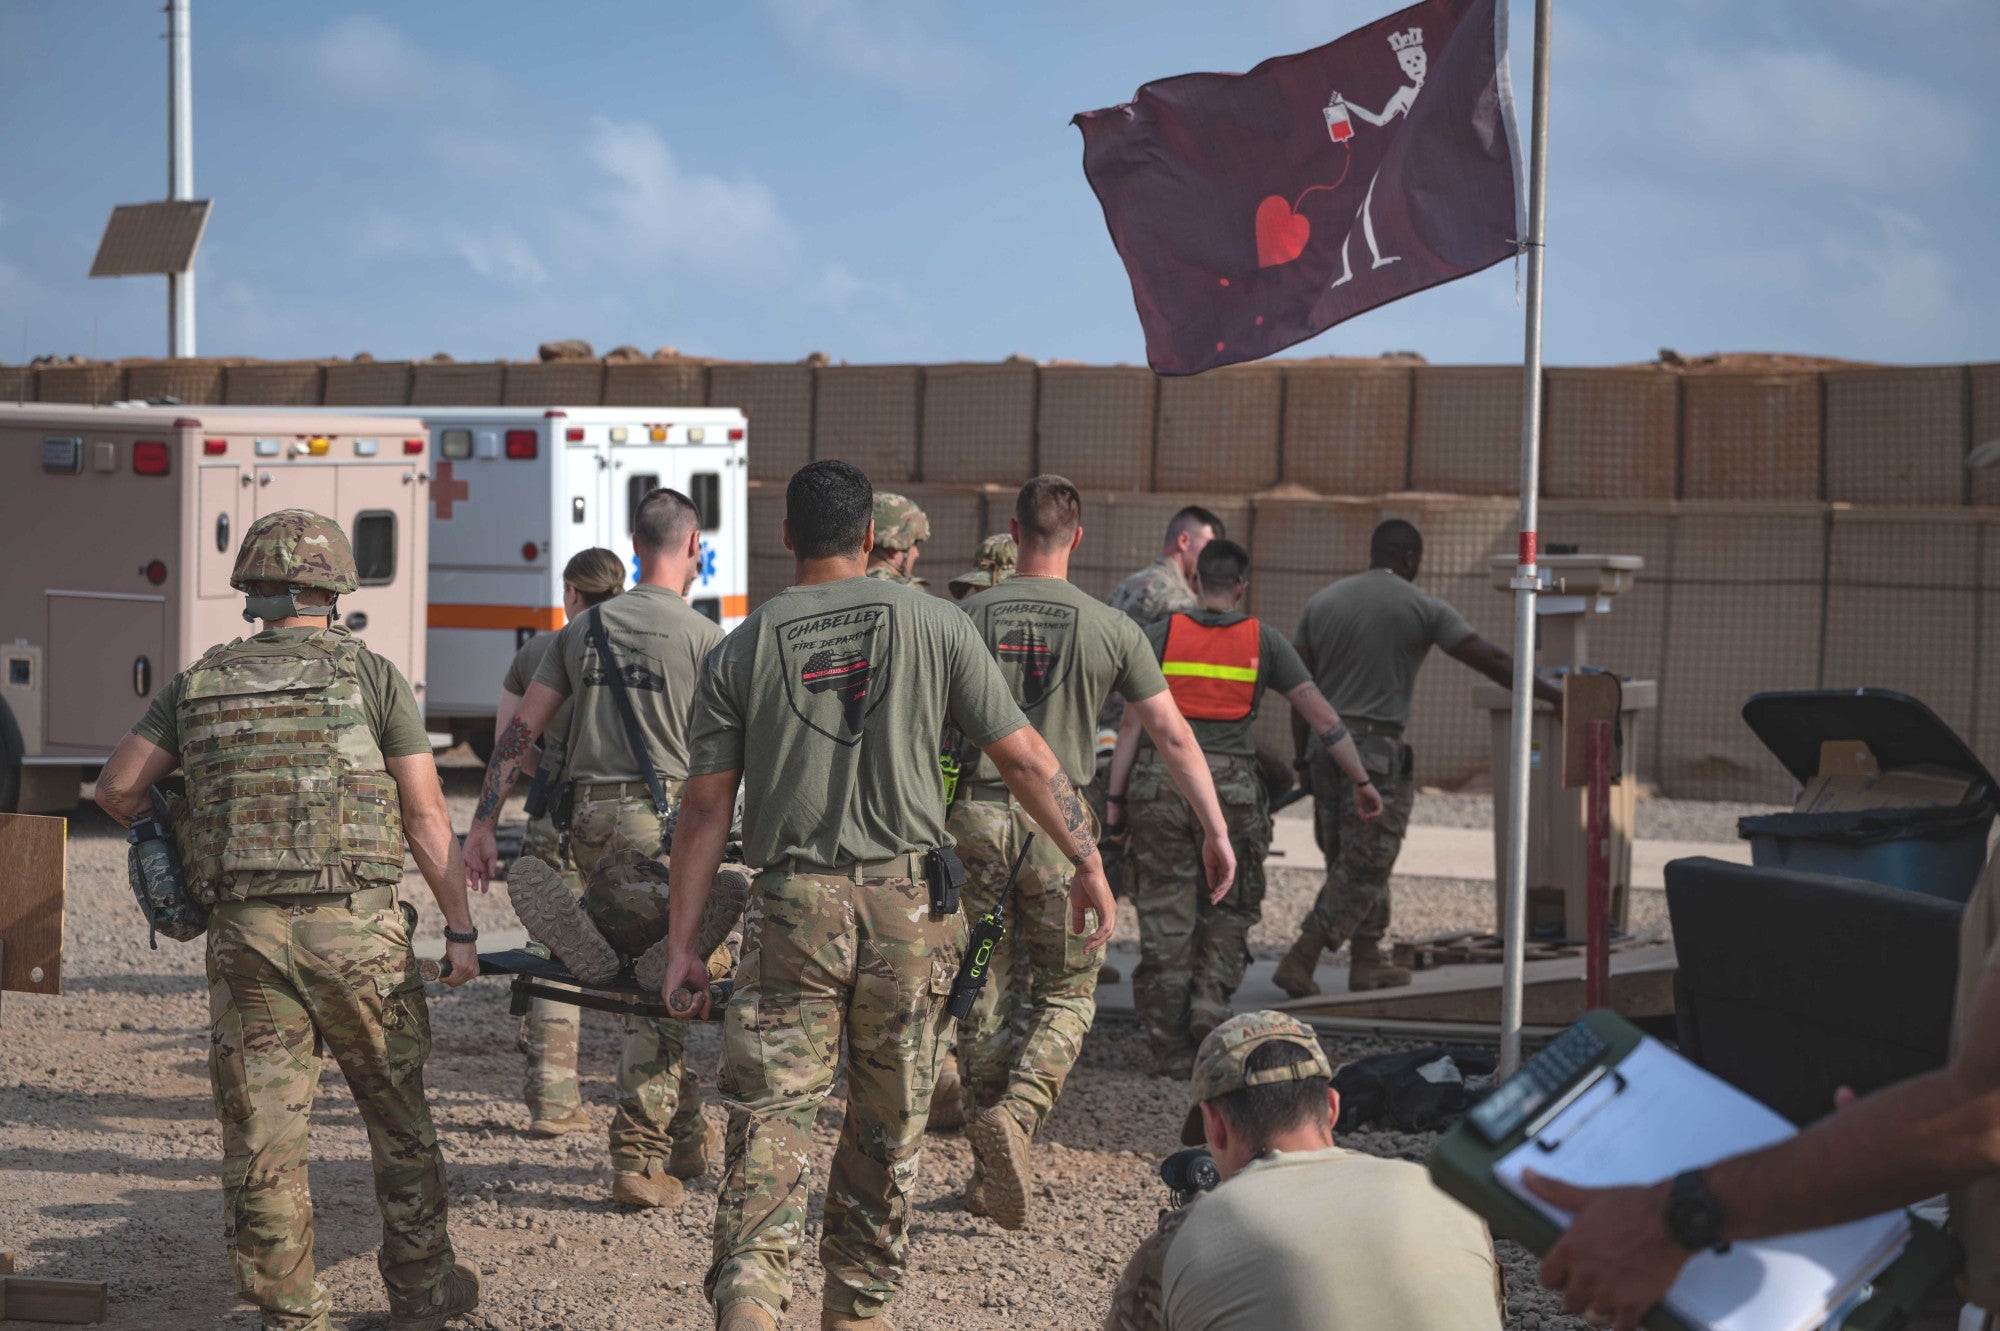 U.S. service members supporting Combined Joint Task Force - Horn of Africa, tend to simulated casualties during a mass casualty exercise at Chabelley Airfield, Djibouti, April 21, 2022. The exercise focused on coordination and communication between different units and mission partners in order to provide effective medical evacuation support for joint operations in the Horn of Africa. (U.S. Air Force photos by Staff Sgt. Joel Pfiester)